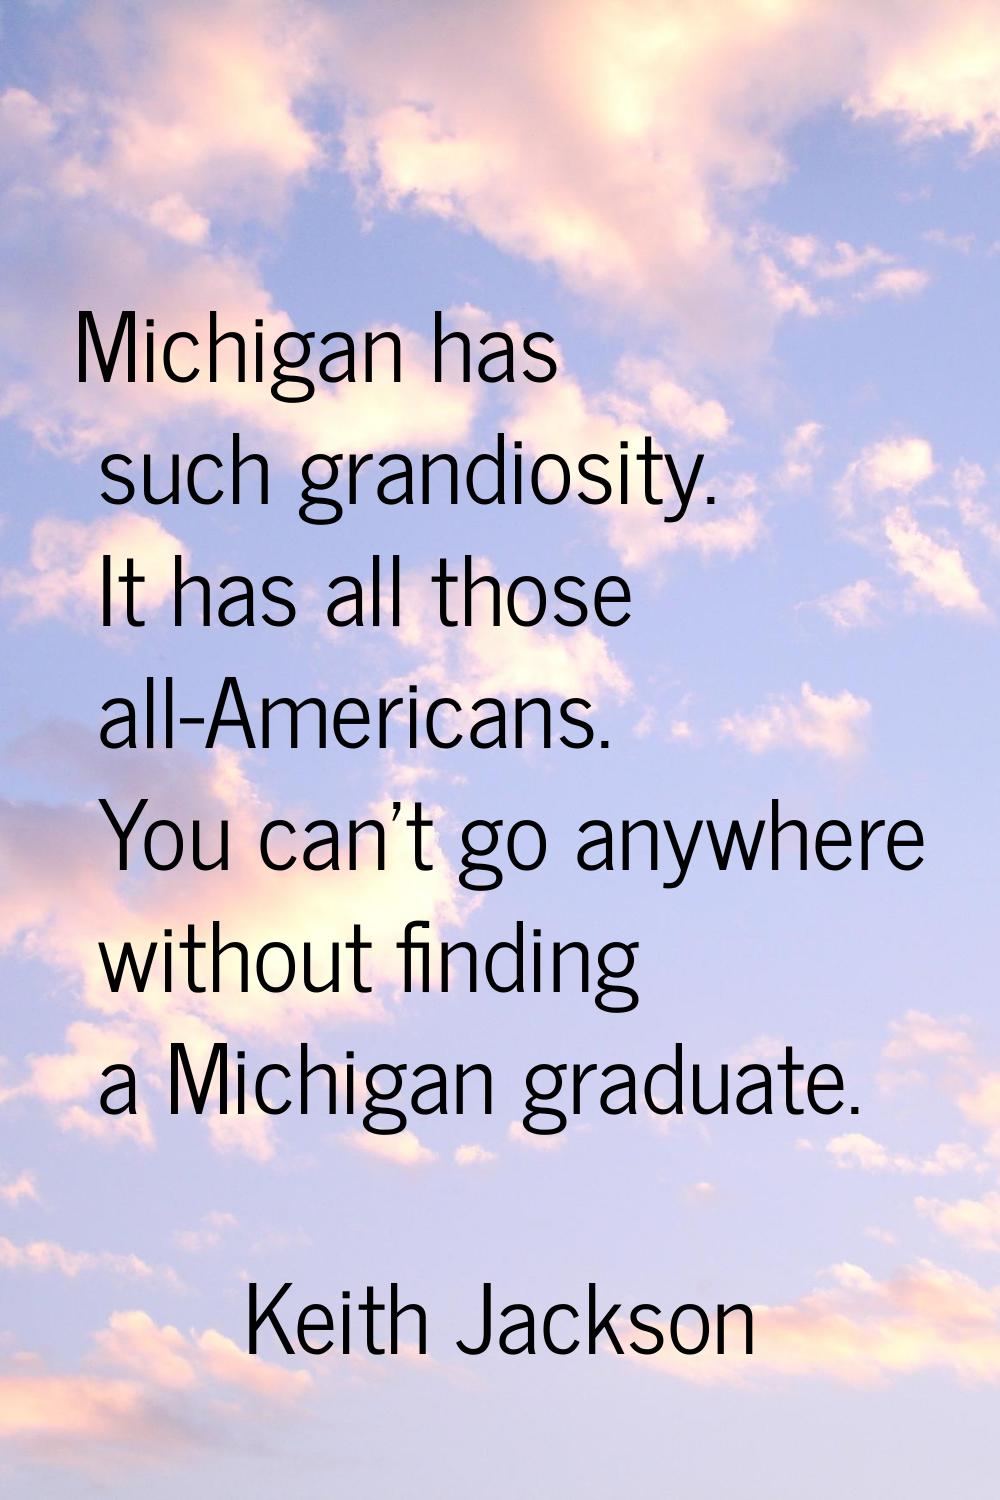 Michigan has such grandiosity. It has all those all-Americans. You can't go anywhere without findin